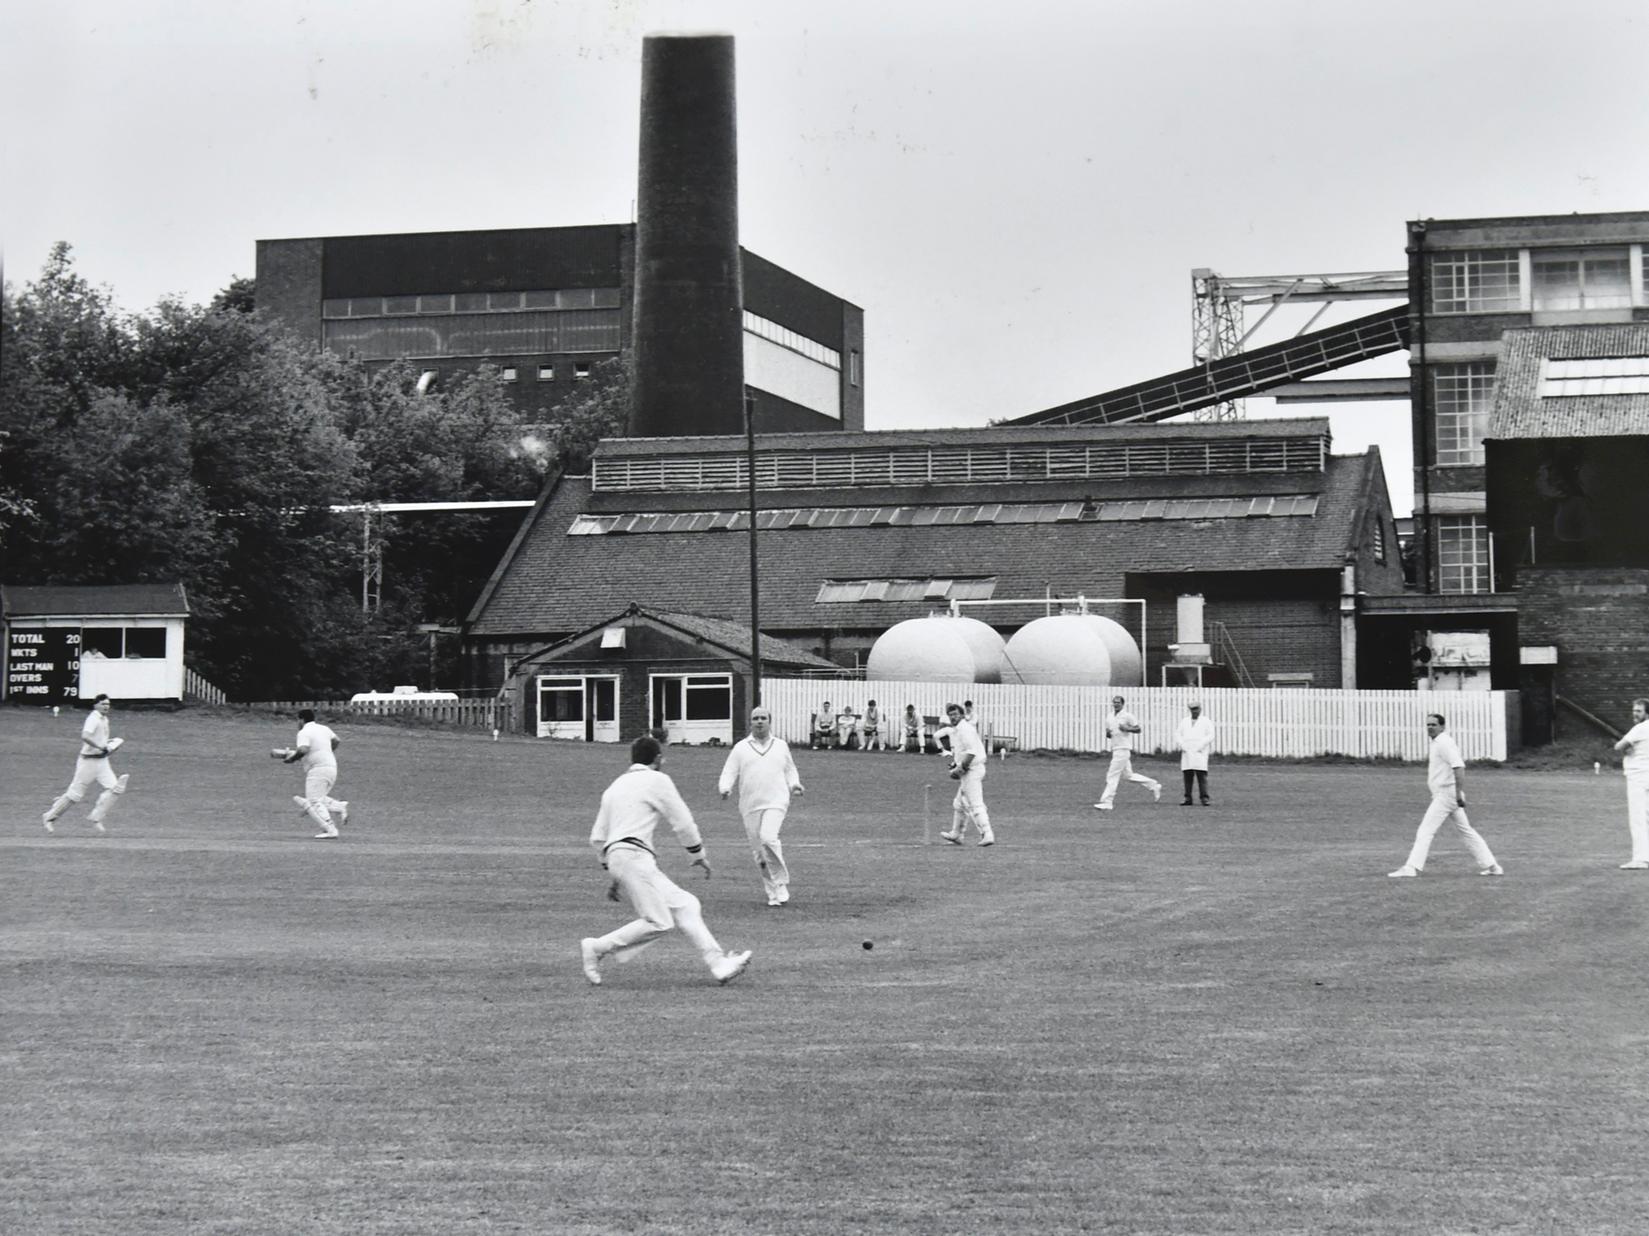 Cricket in Wharfedale in the shadow of the mills that gave Pool Mills their name.